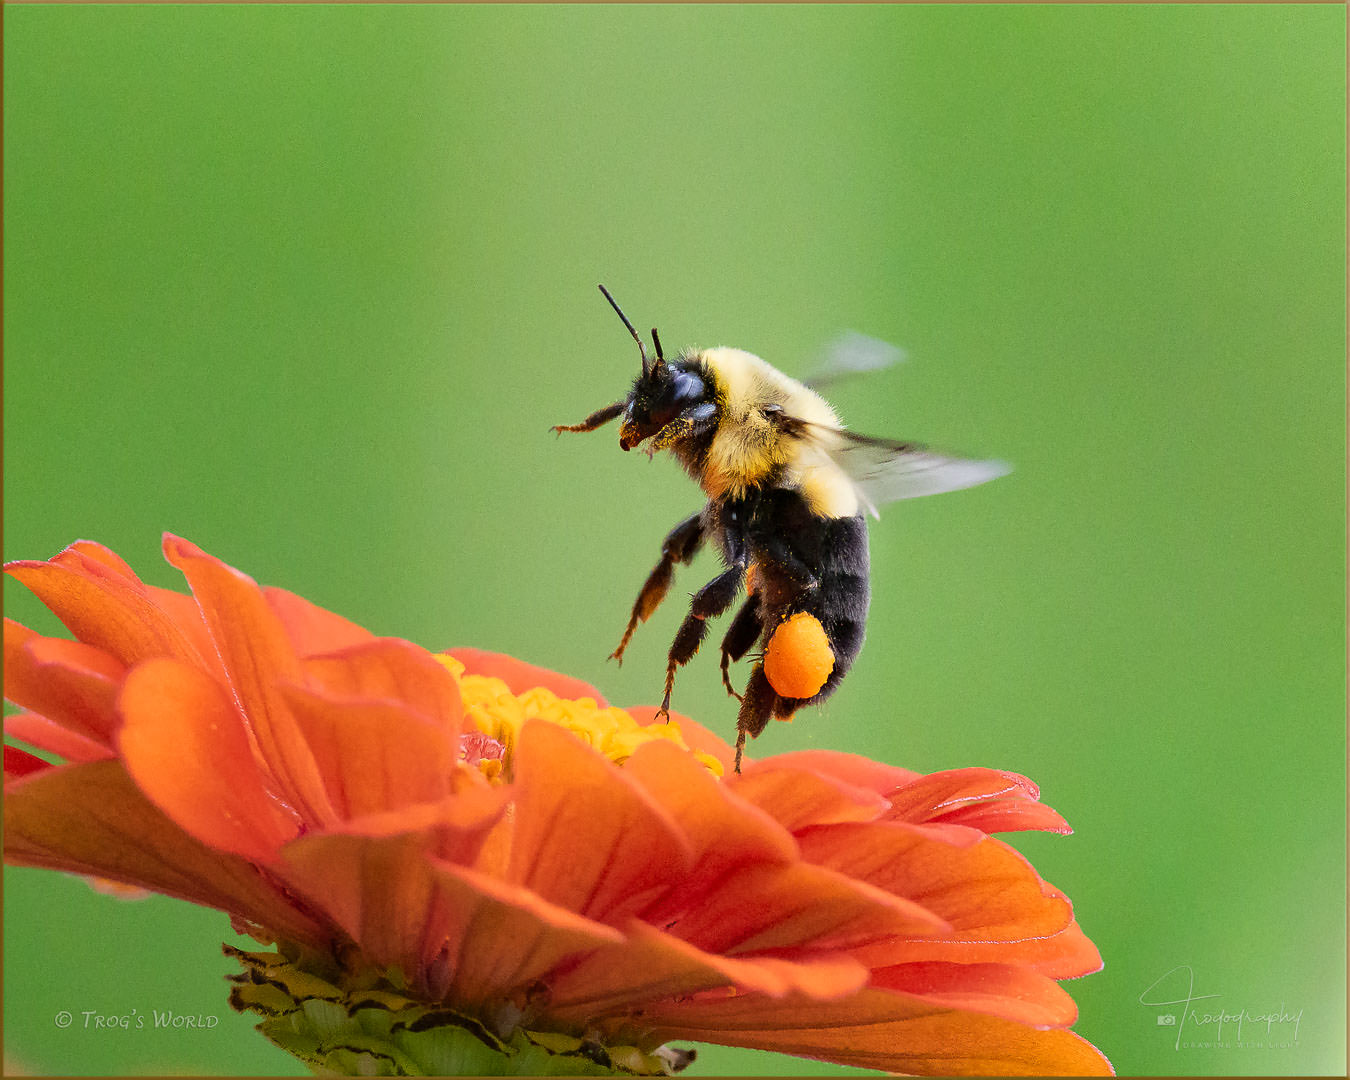 Bumblebee in flight with a pollen sac